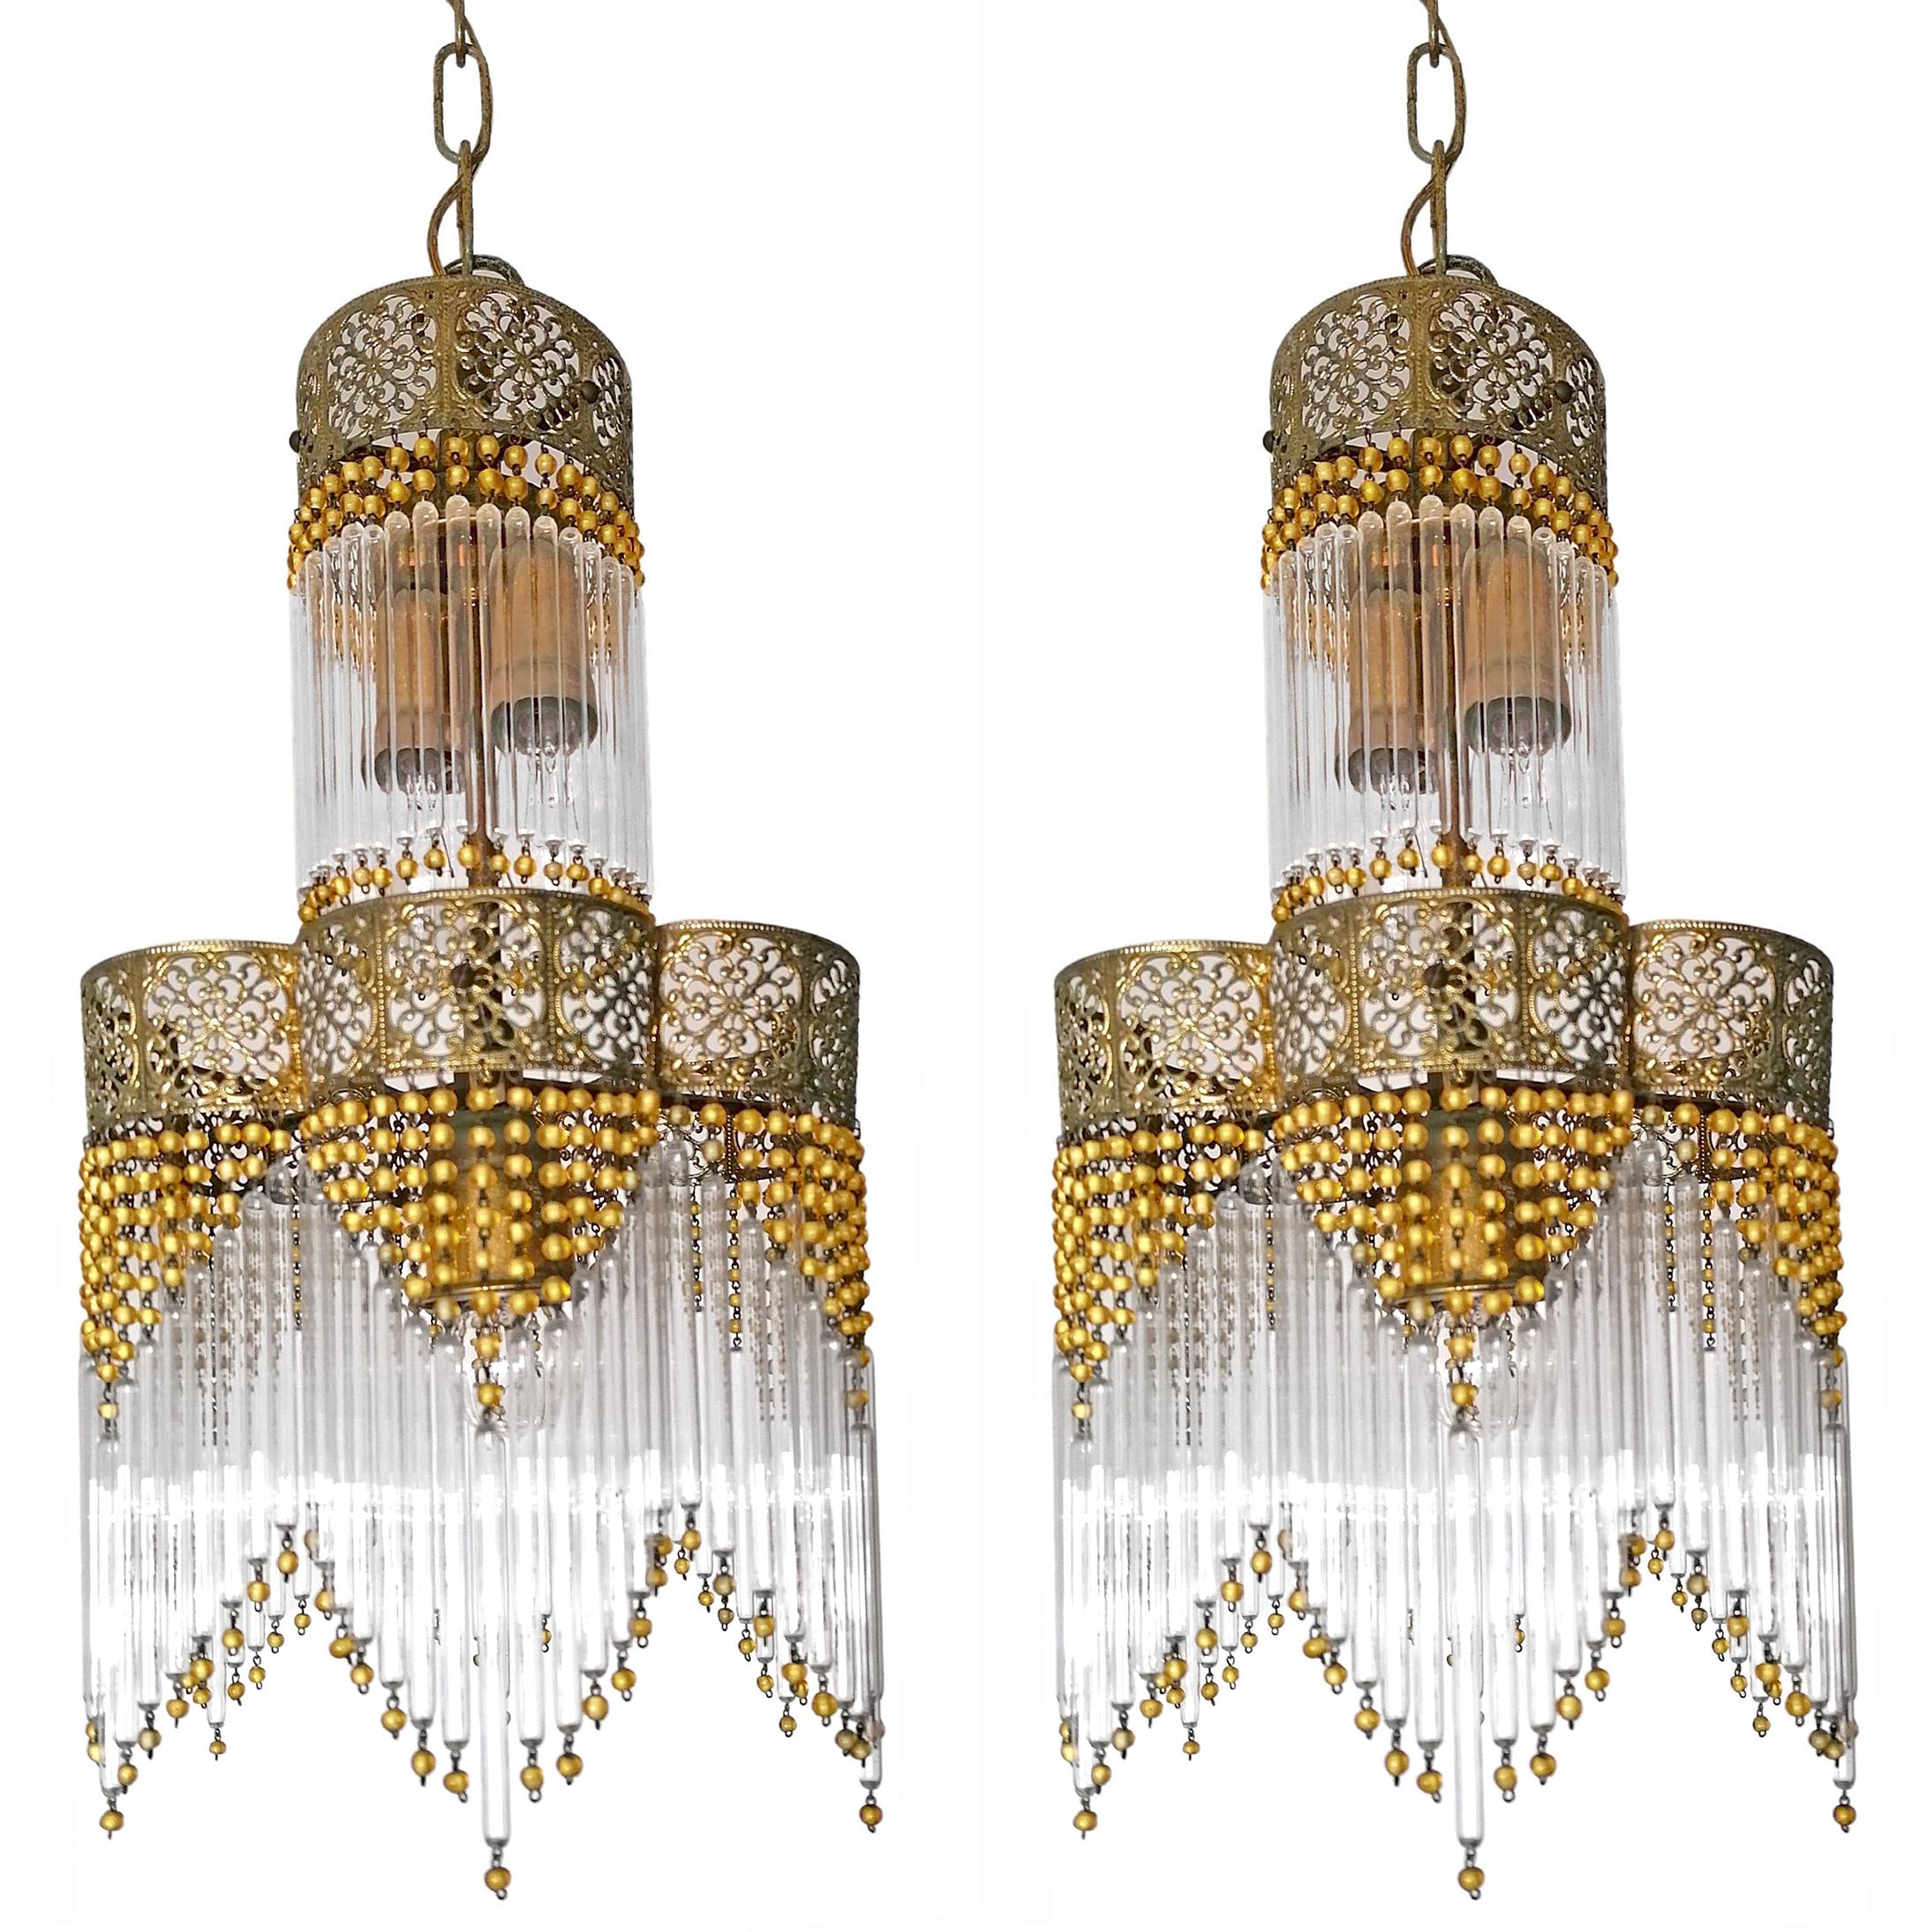 French Pair of Art Deco & Art Nouveau Gilt Chandeliers with Amber Beads & Glass Fringe